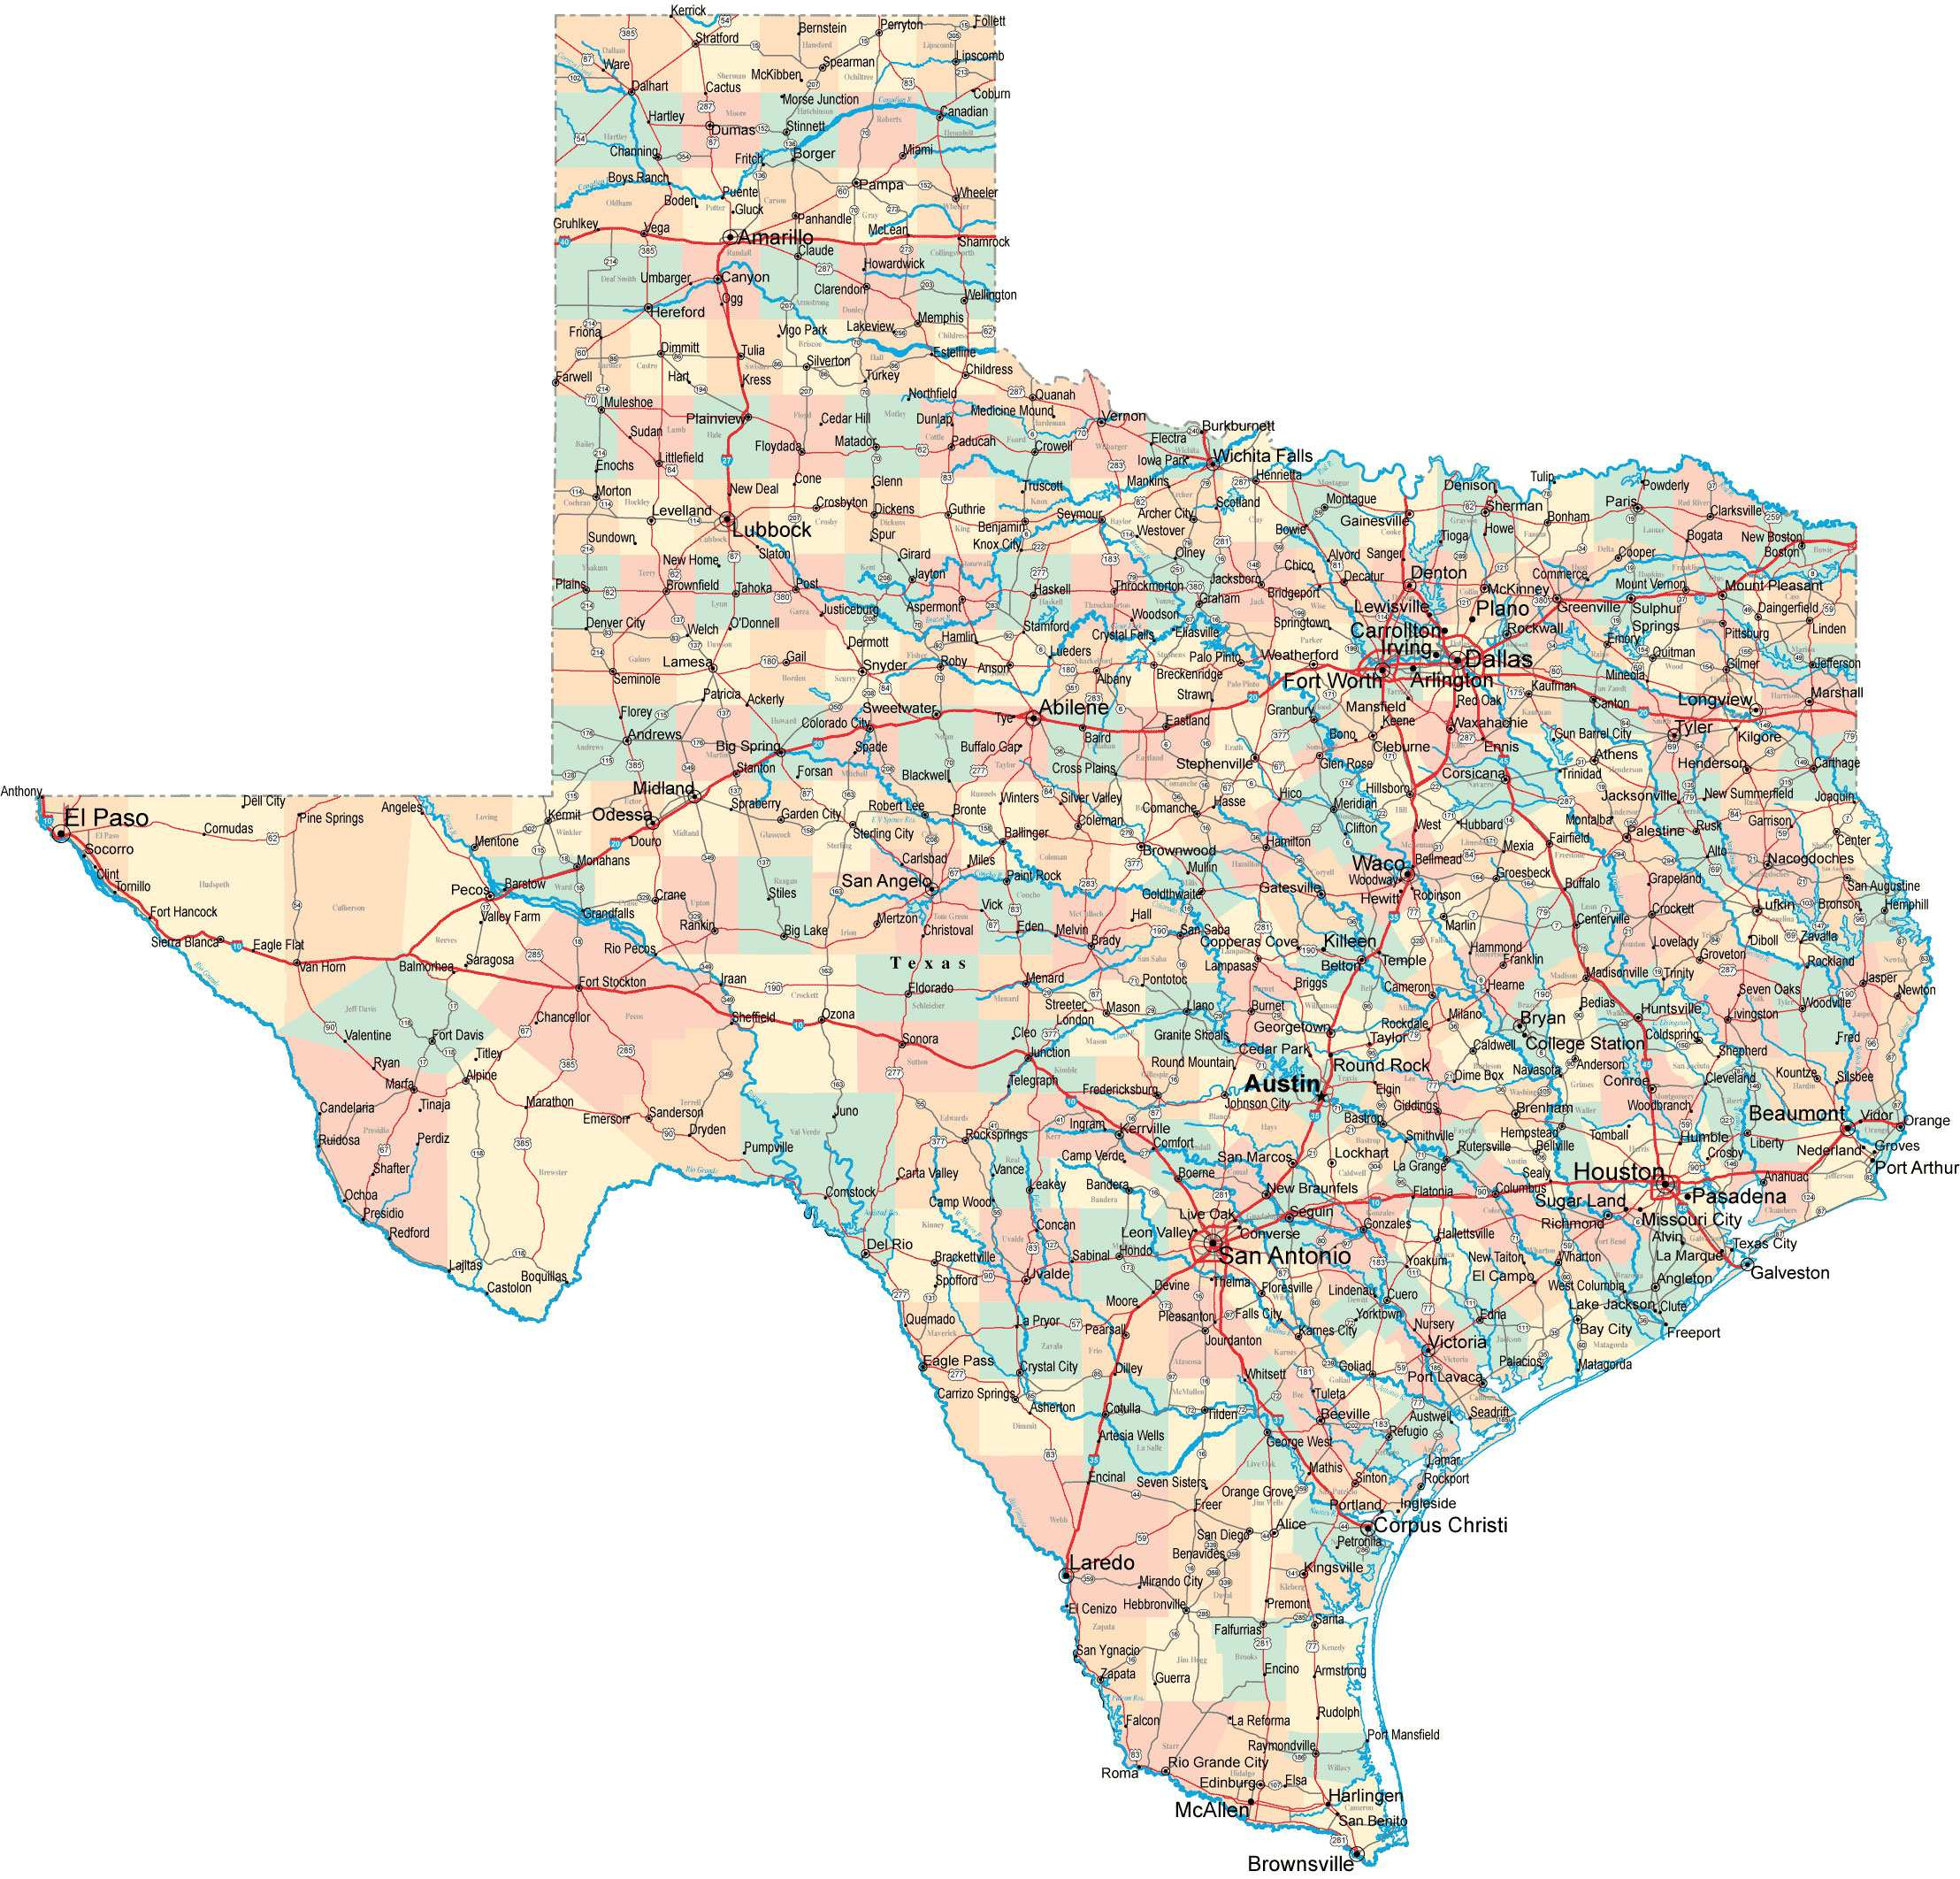 Large Texas Maps For Free Download And Print | High-Resolution And - Road Map Of Texas And Oklahoma